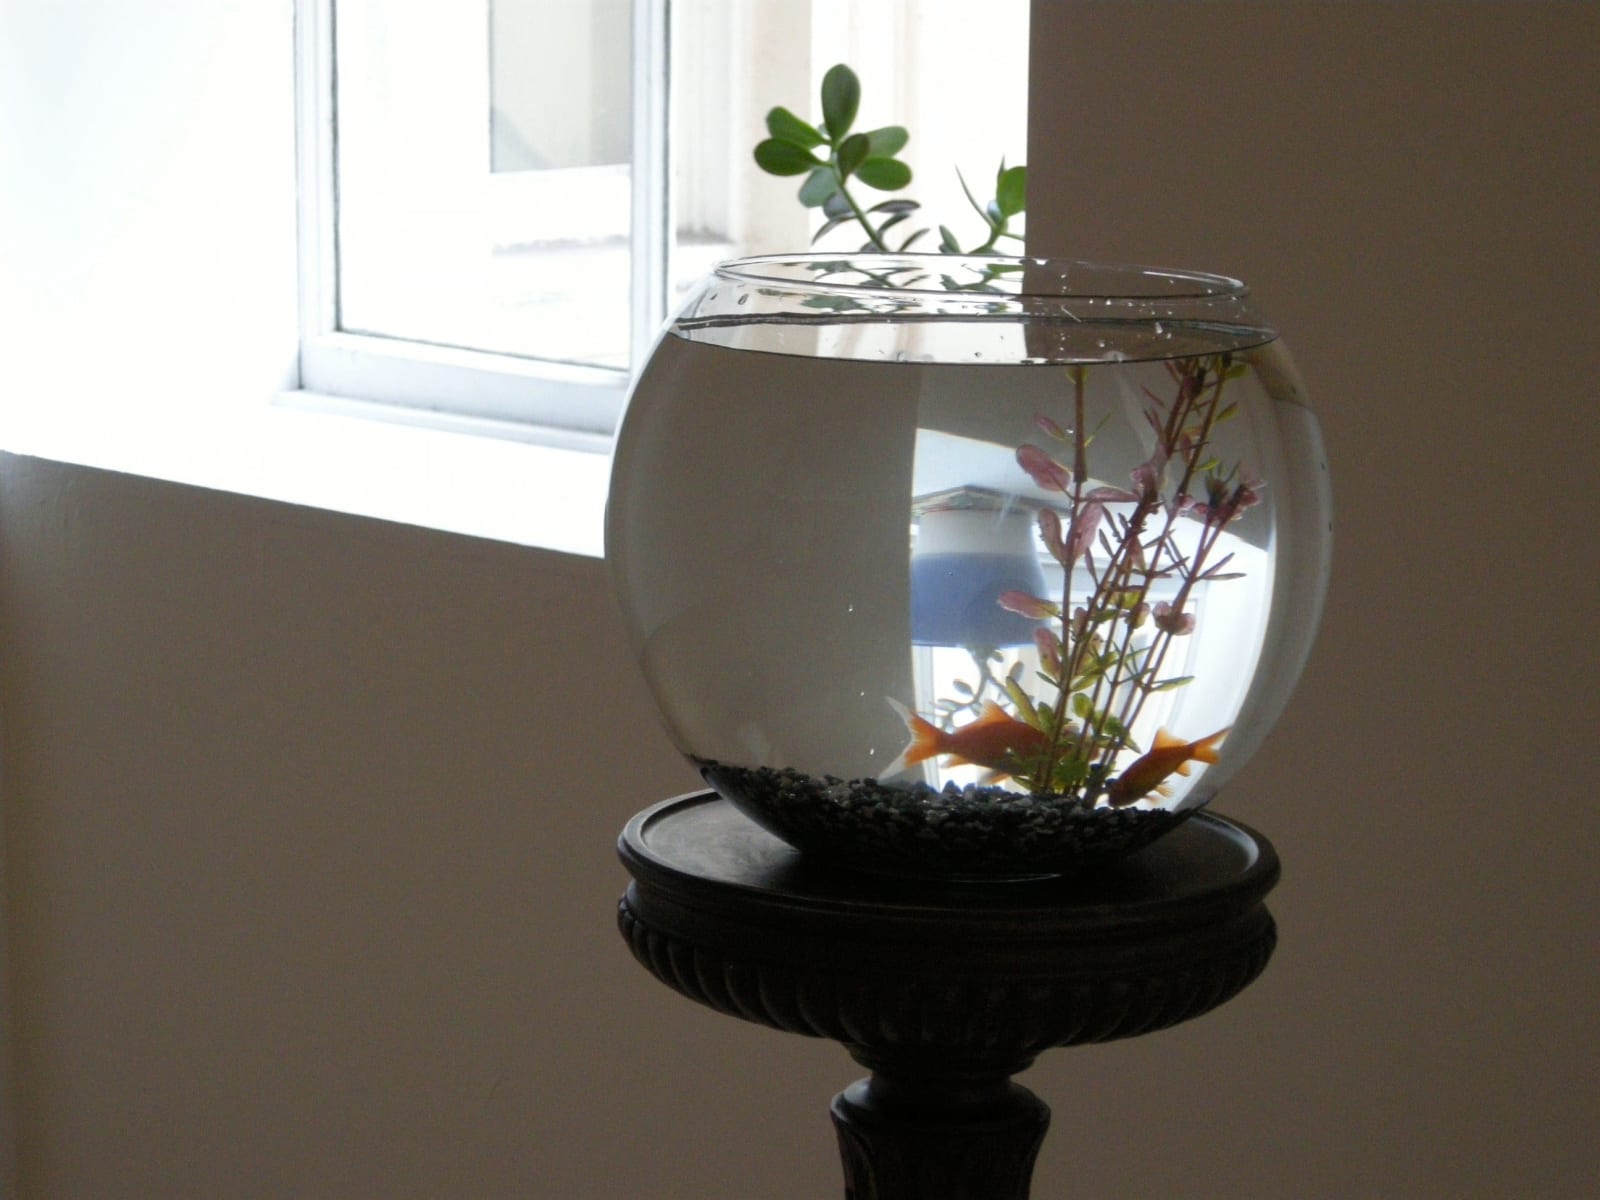 Juliette Blightman, 'Please Water the Plant and Feed the Fish' at Institute of Contemporary Arts, London, 2008